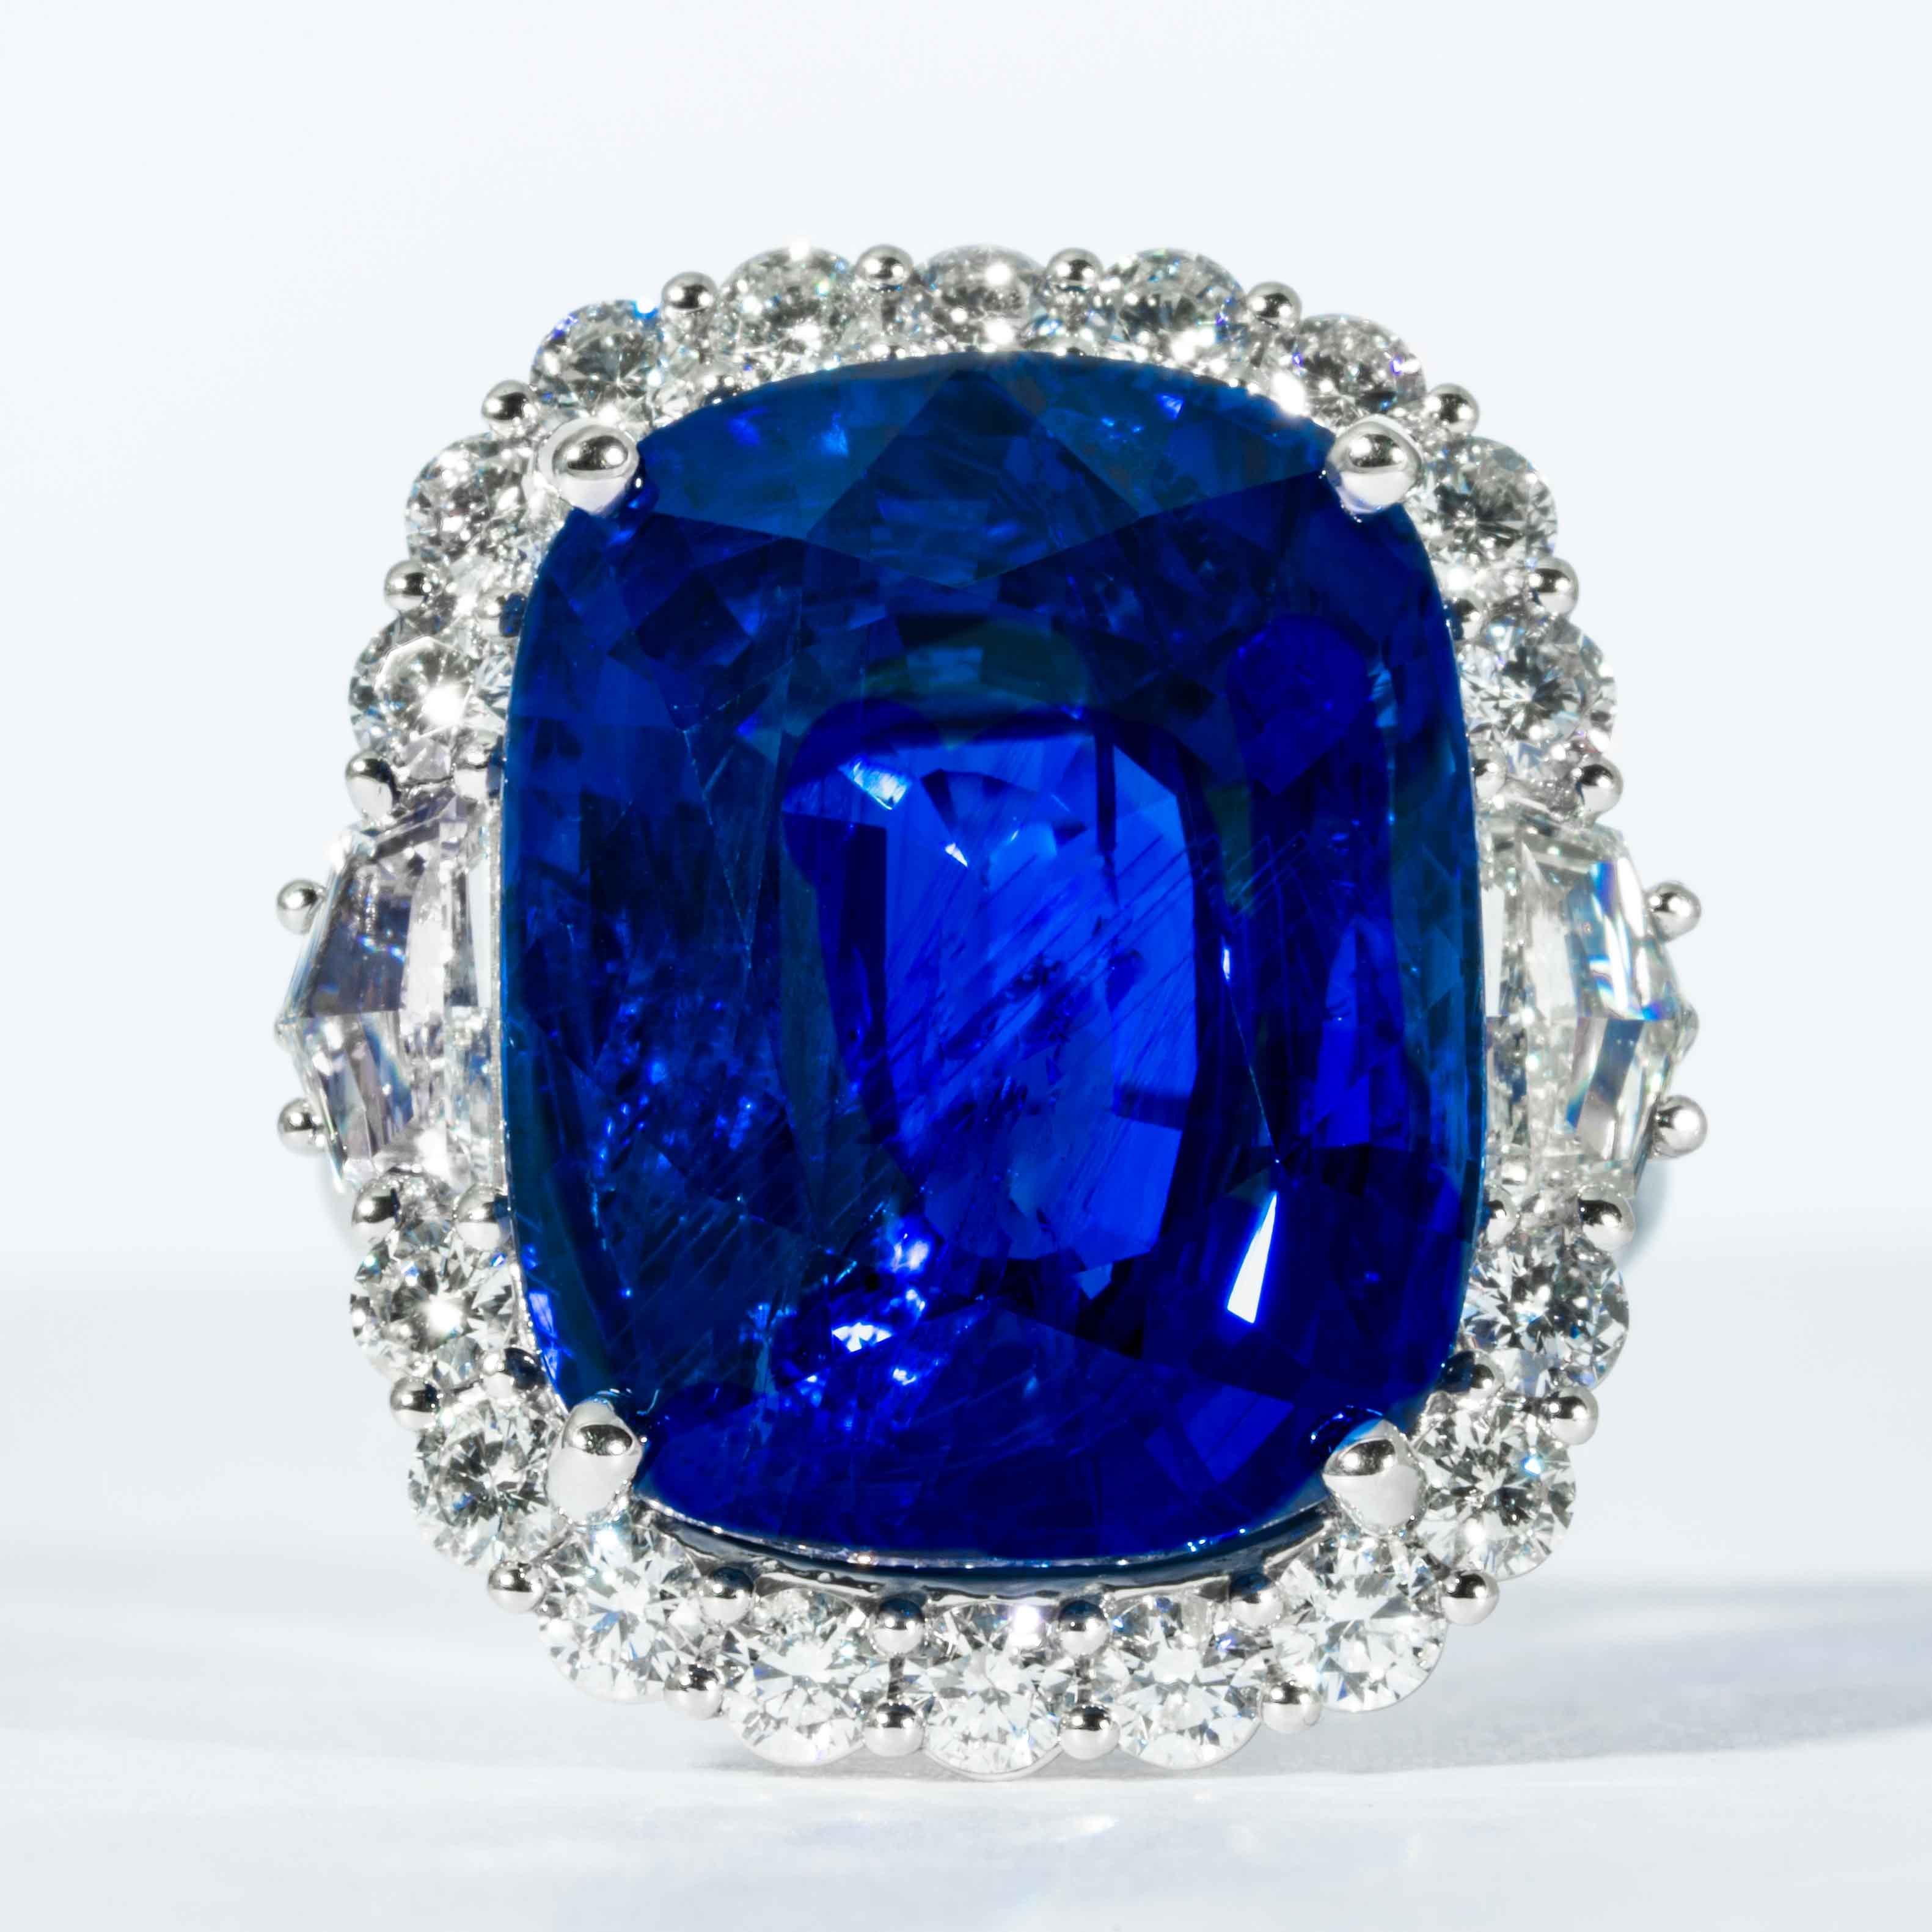 This sapphire and diamond cluster ring is offered by Shreve, Crump & Low.  This cushion cut Royal Blue Ceylon sapphire is custom set in a handcrafted Shreve, Crump & Low one-of-kind platinum ring, consisting of 1 majestic Royal blue cushion cut